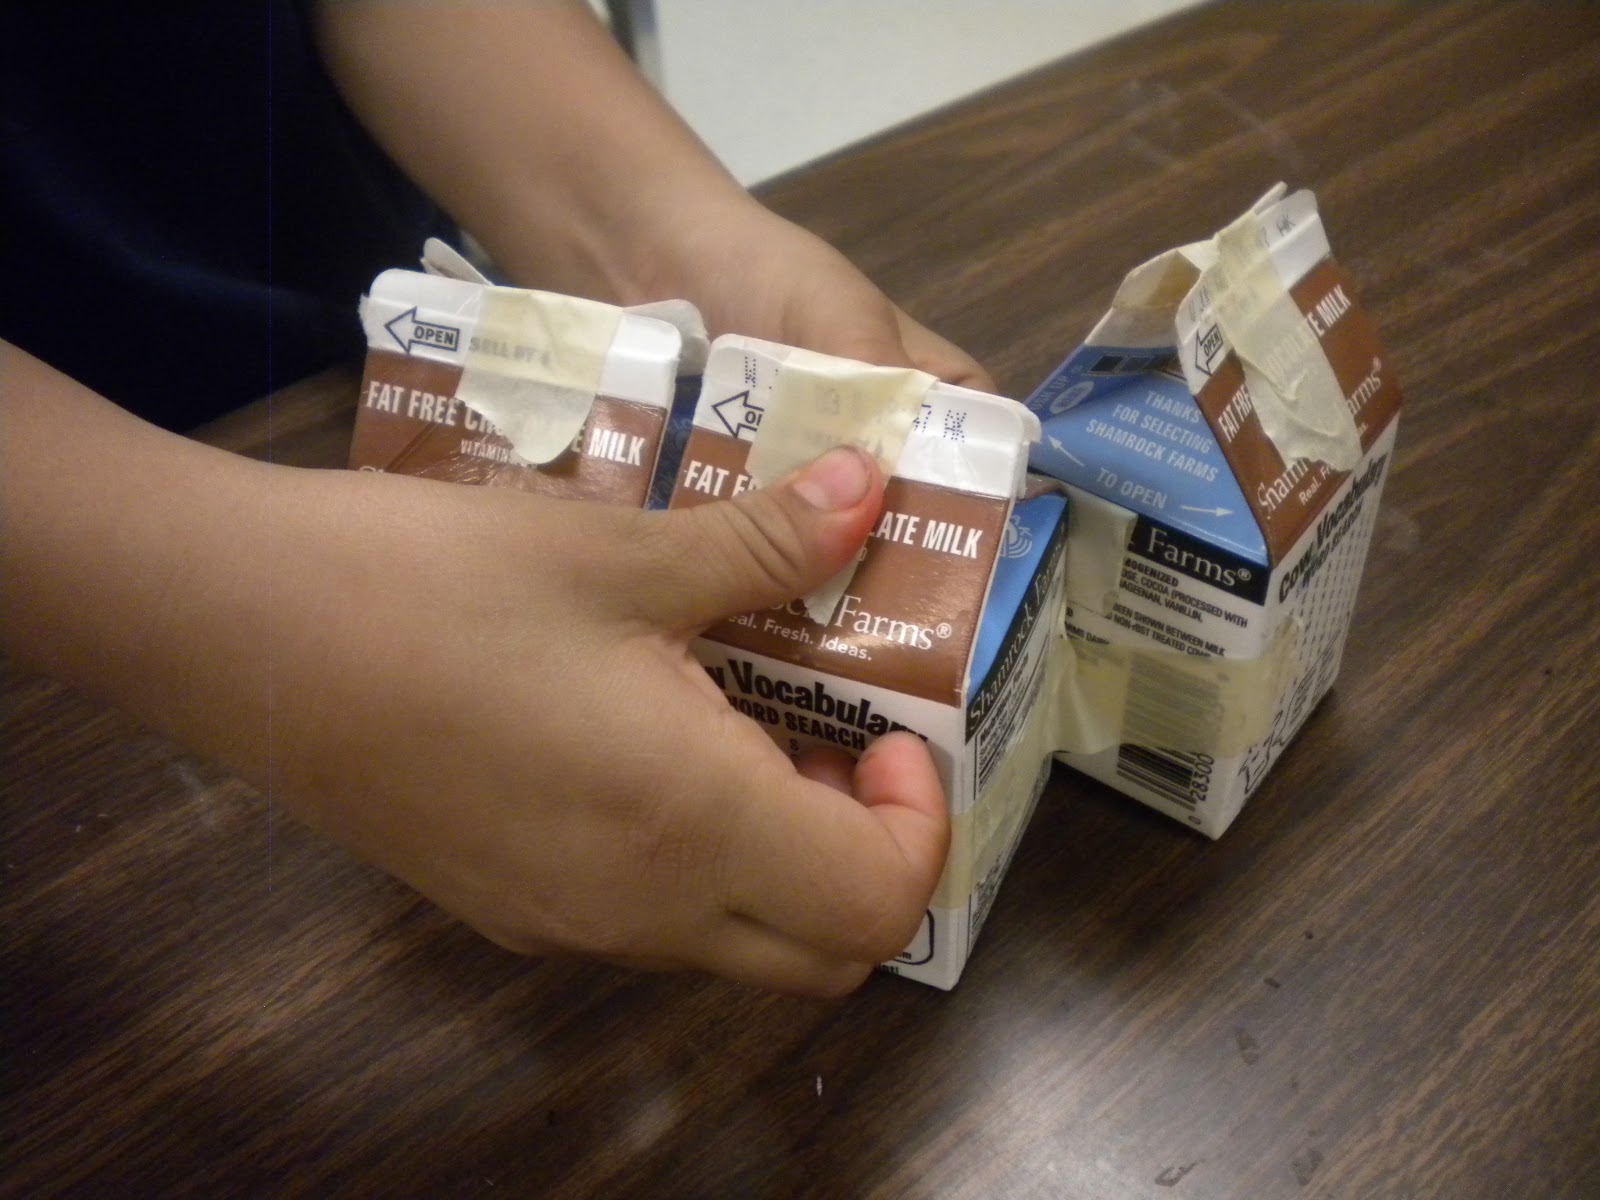 Be sure to give students multiple milk cartons so they can build any size house